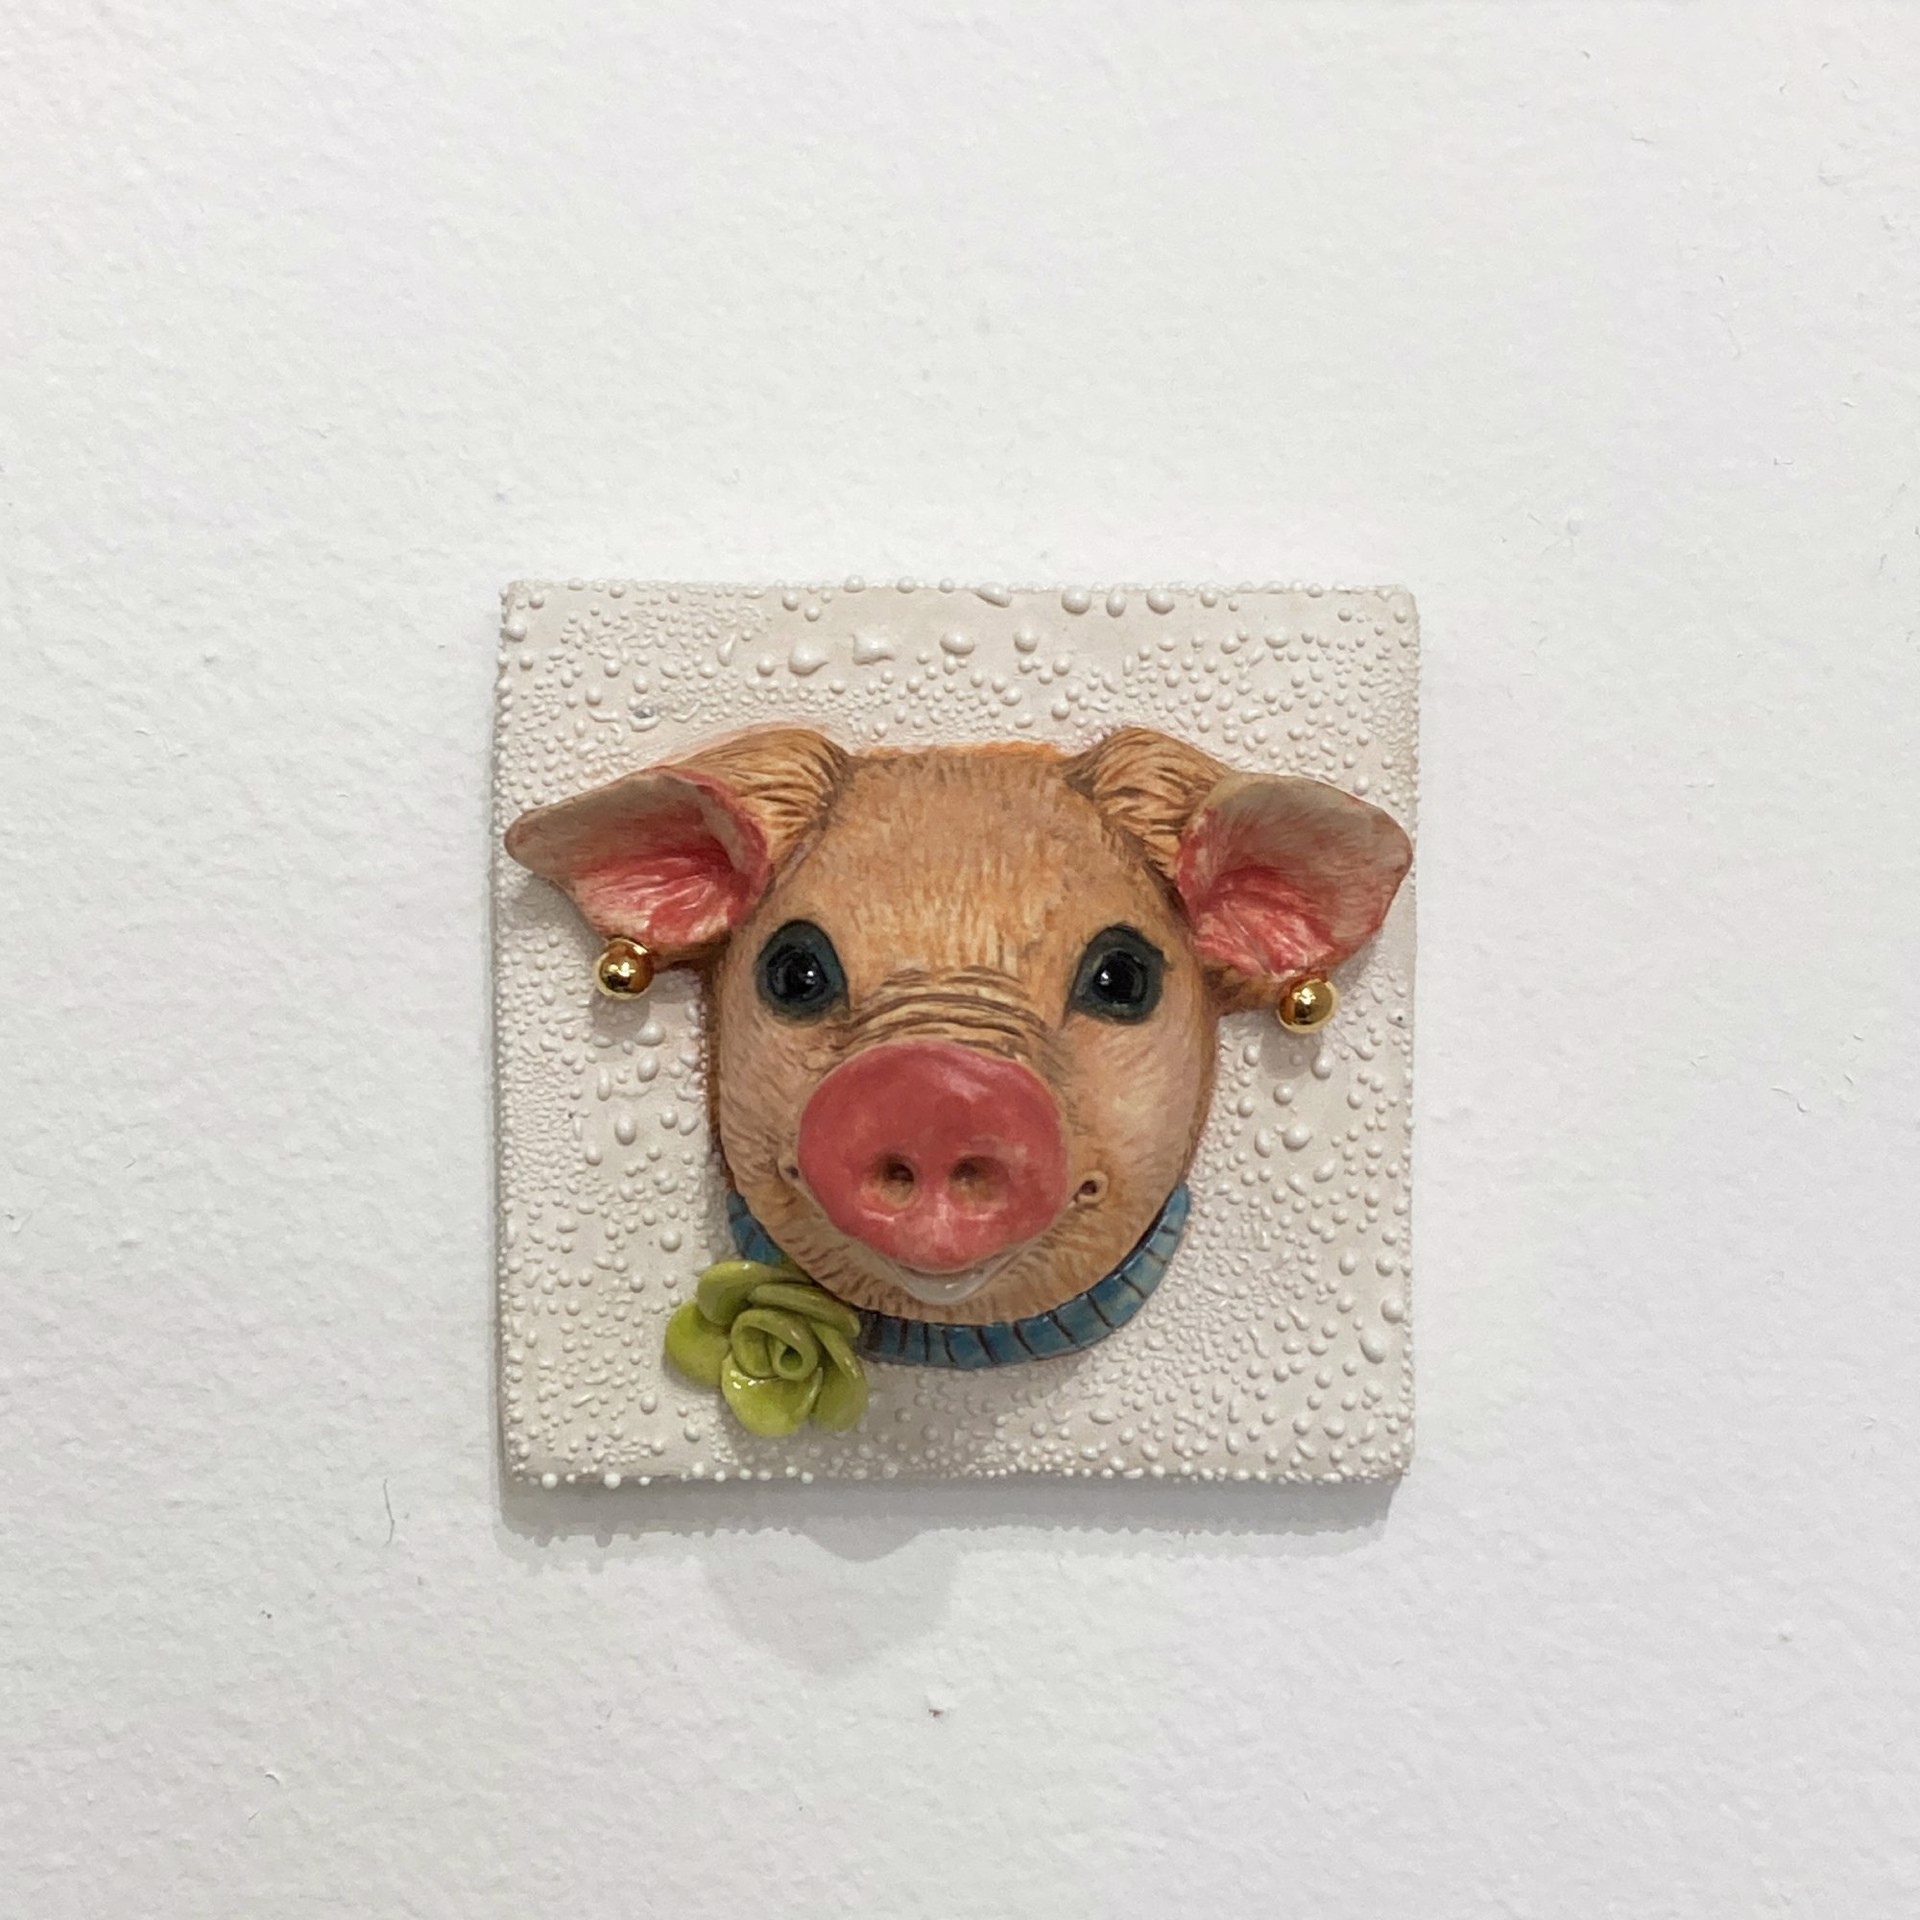 Pet Tile Miss Piggy by Rumi Poling